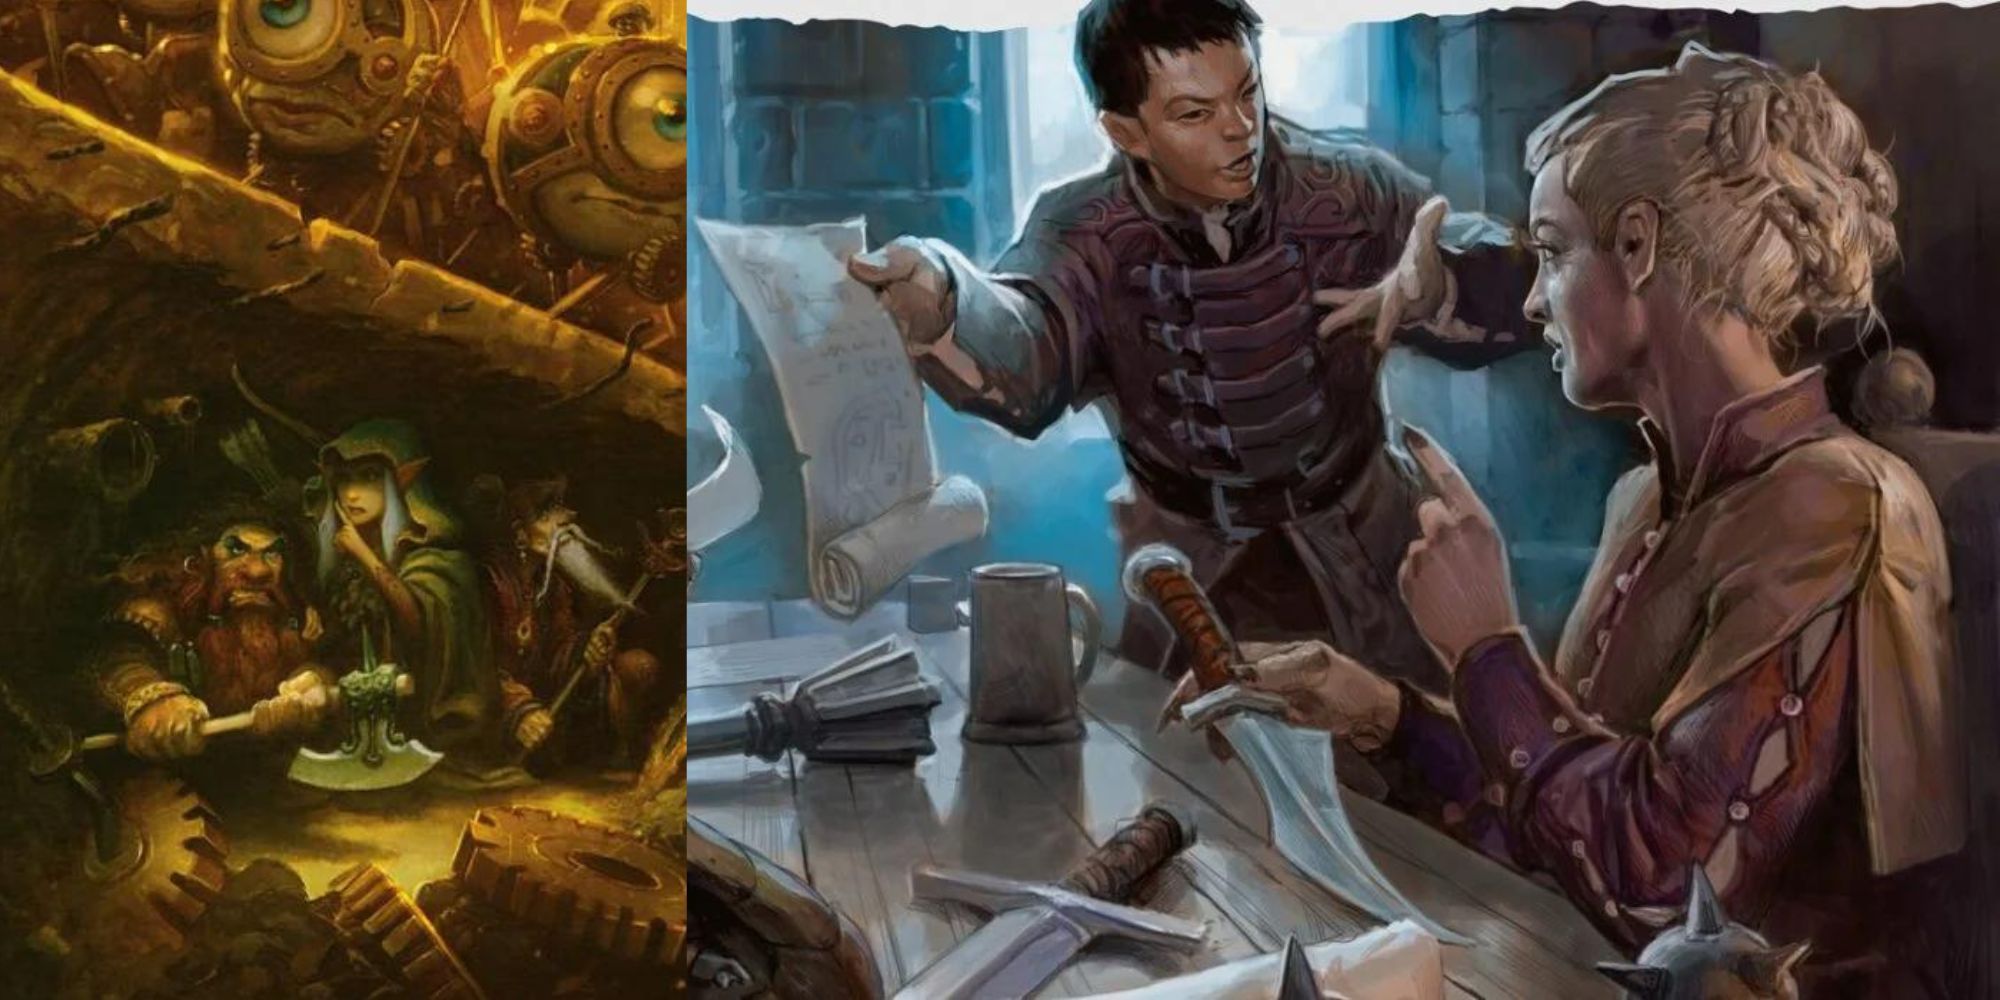 Split image of D&D characters discussing around a table and hiding from modrons